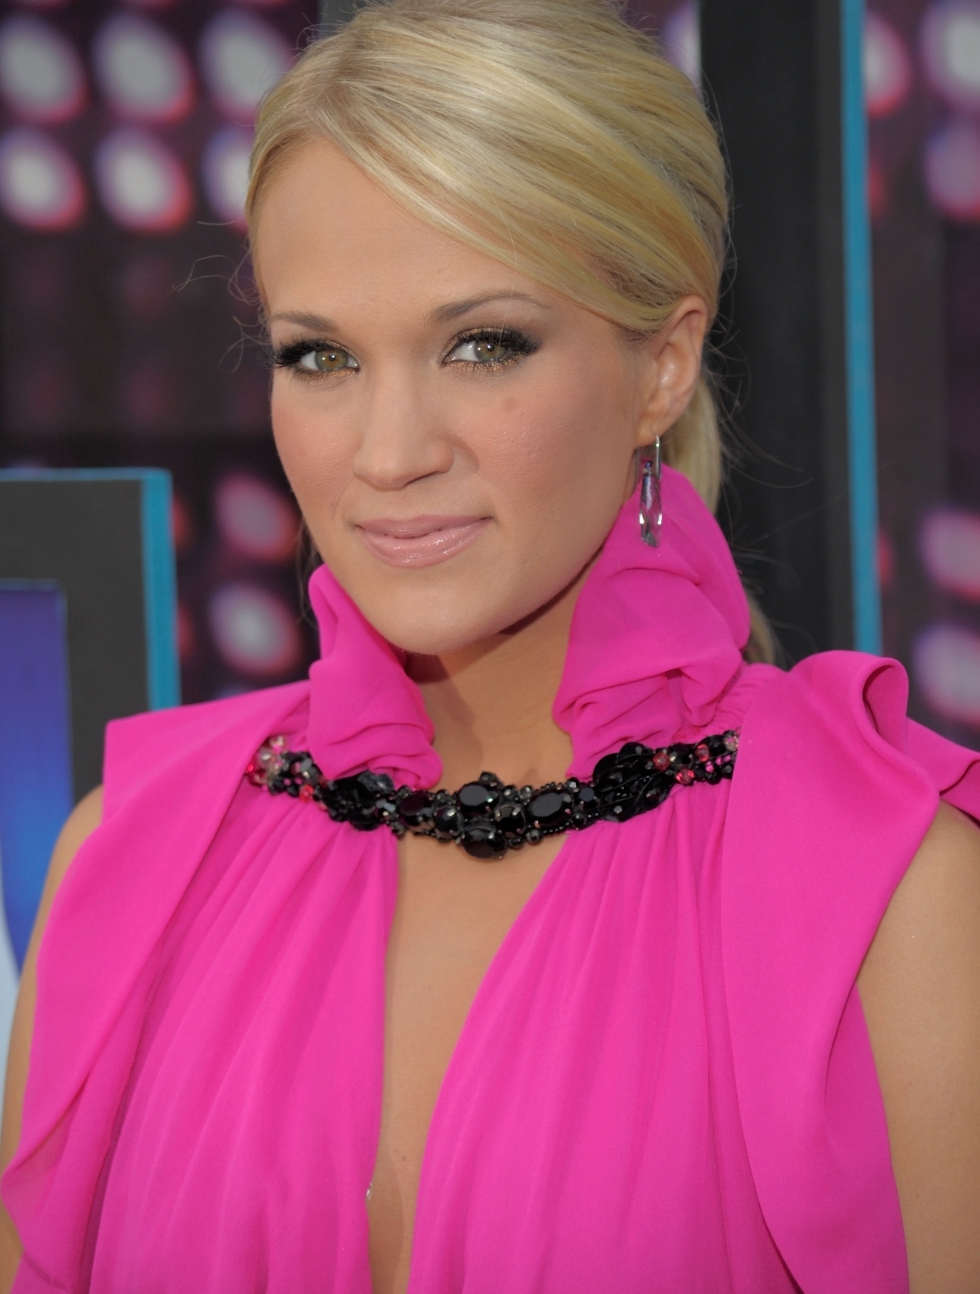 Carrie Underwood - CMT Music Awards